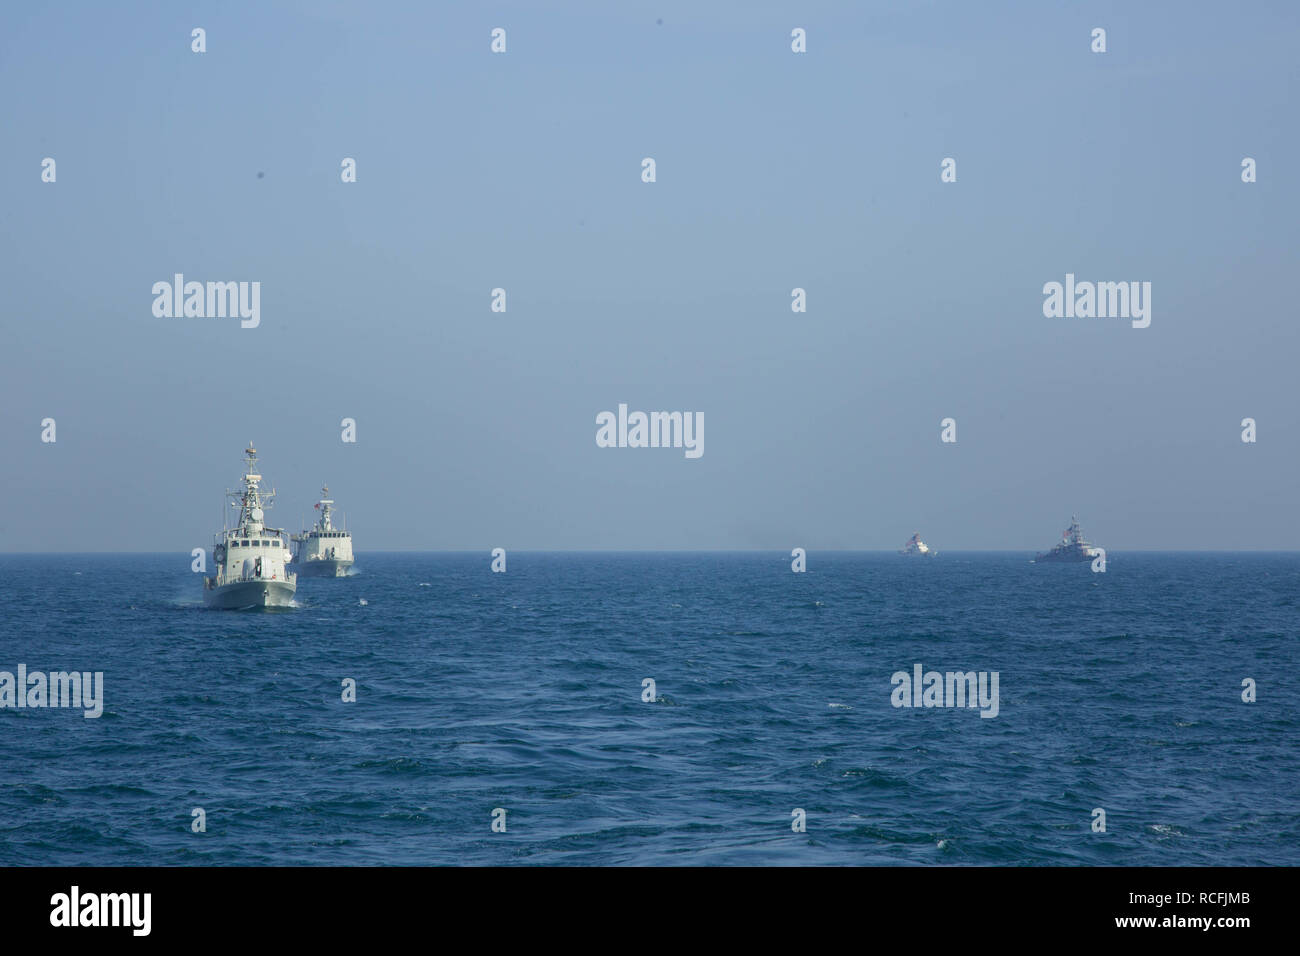 ARABIAN GULF (Jan. 9, 2019) U.S. Navy Cyclone-class coastal patrol ship USS Thunderbolt (PC 12), U.S. Coast Guard Island-class patrol cutter USCGC Wrangell WPD (1332), Royal Bahrain Naval Force Al-Manama-class FPB 62 guided-missile patrol combatant 50 and fast-attack missile craft Al Taweela 23 maneuver behind the Arleigh Burke-class guided-missile destroyer USS Decatur (DDG 73) during exercise Neon Union 19. Neon Union 19 is a bilateral air and surface maritime security operations exercise to strengthen critical warfighting capabilities and enhance interoperability and operational readiness b Stock Photo